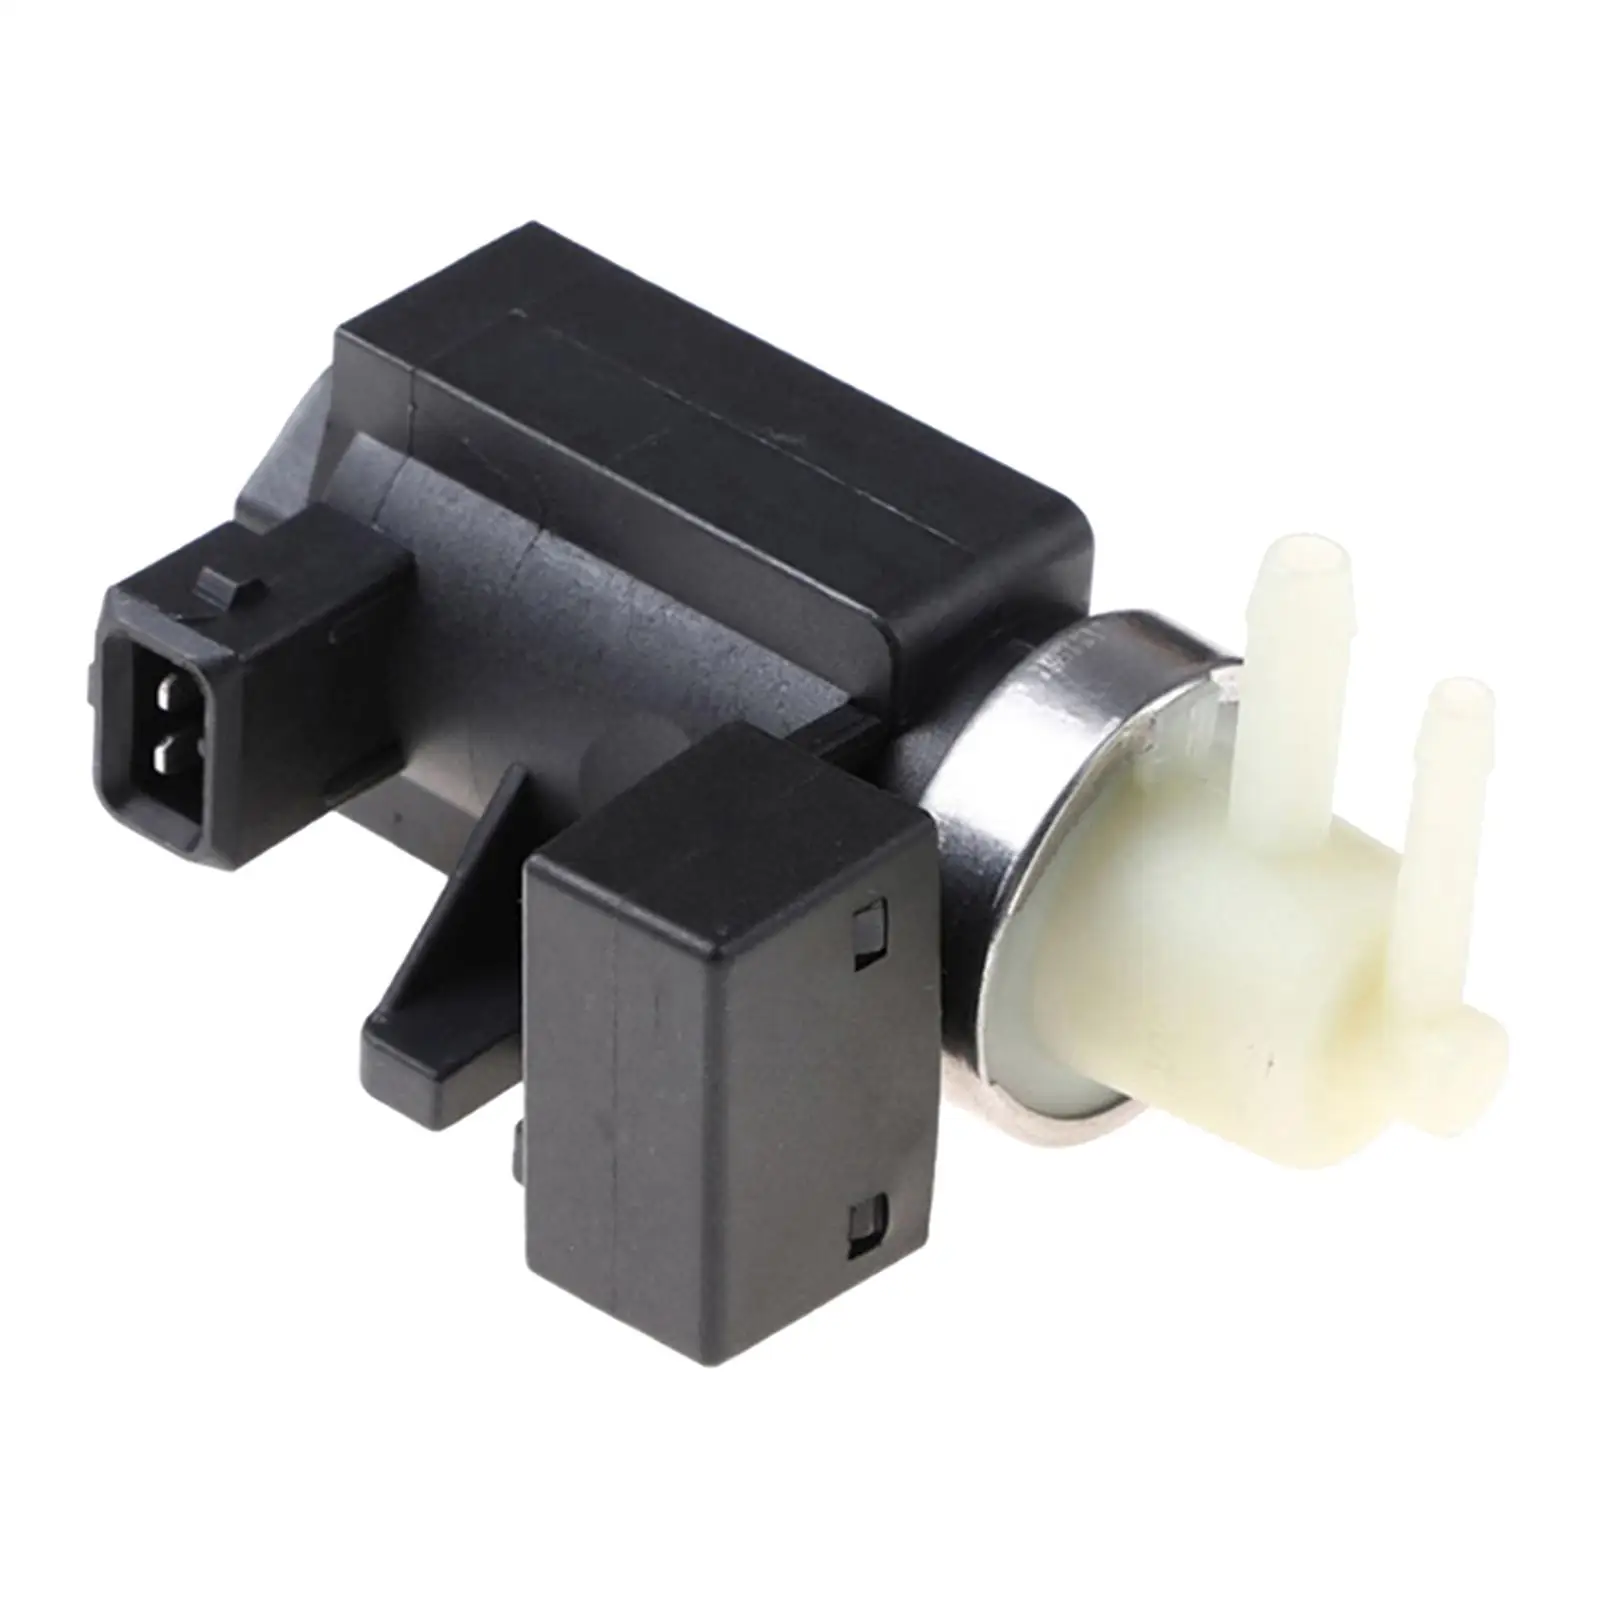 Turbo Control Solenoid Valve Fits for Vauxhall J 2010-On 55575611 55579900